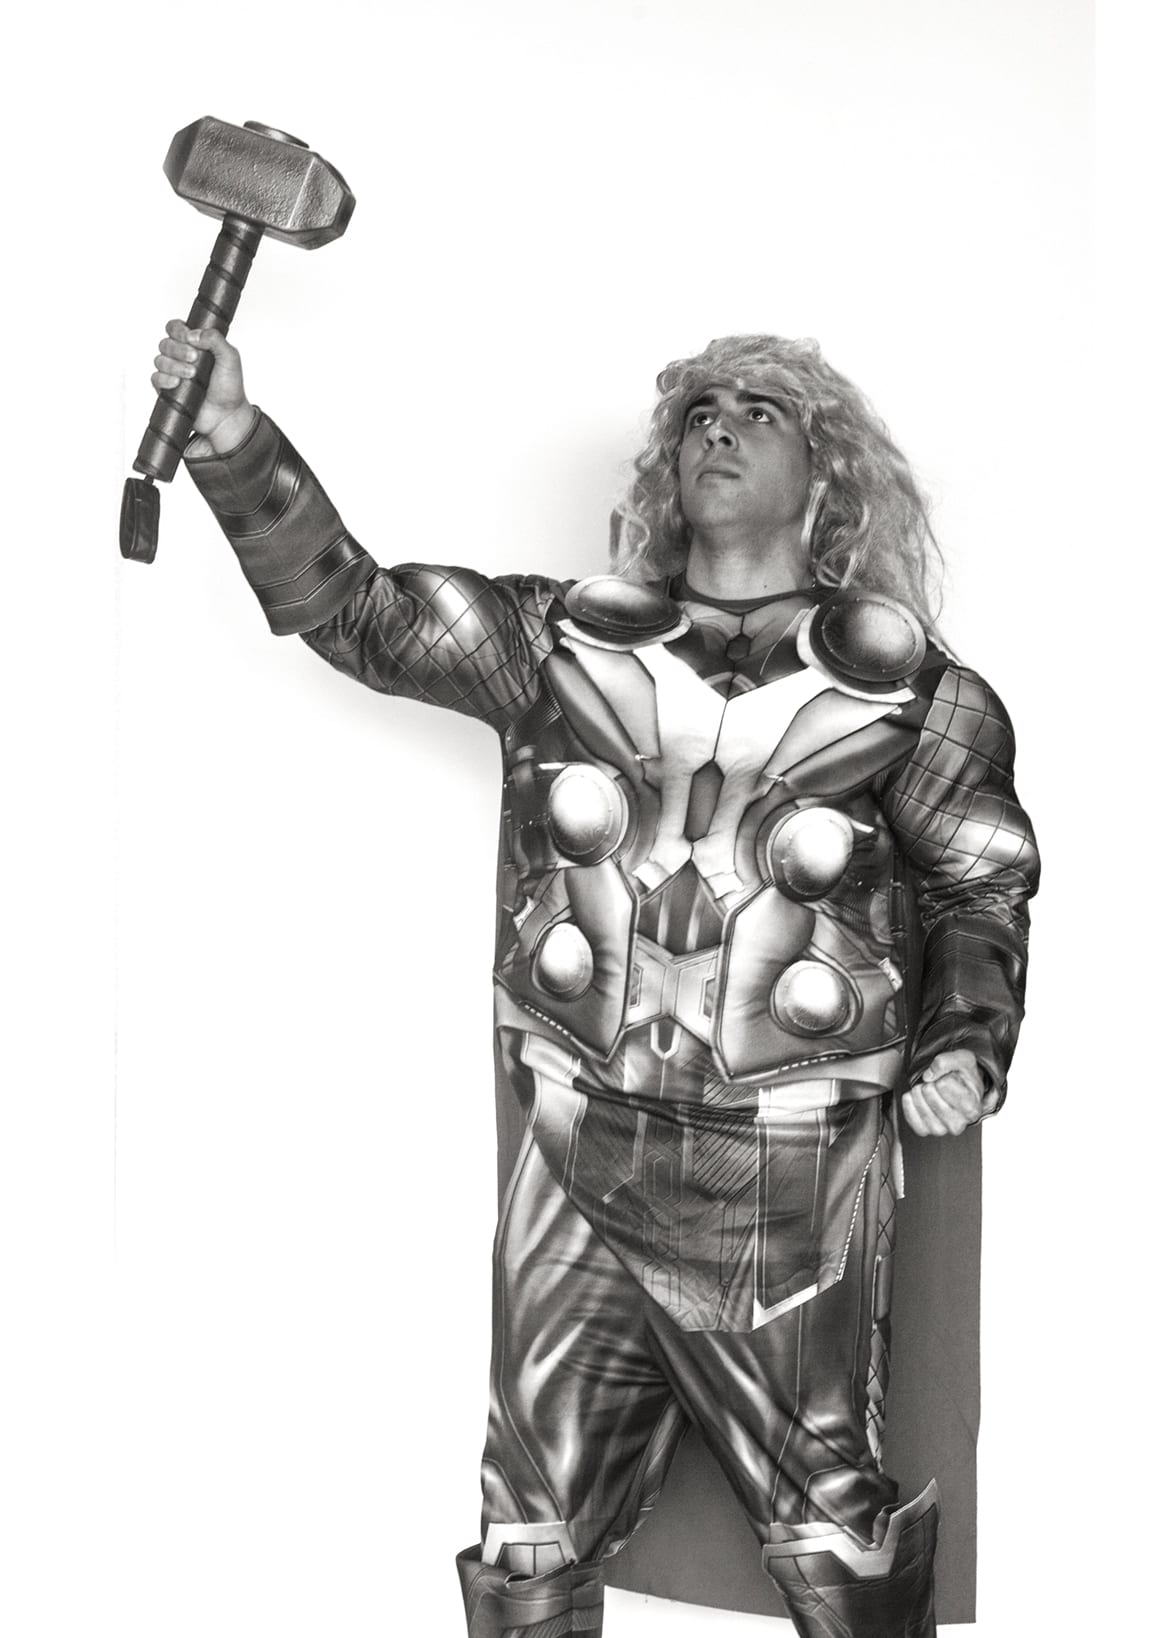 Russell Pagan as Thor